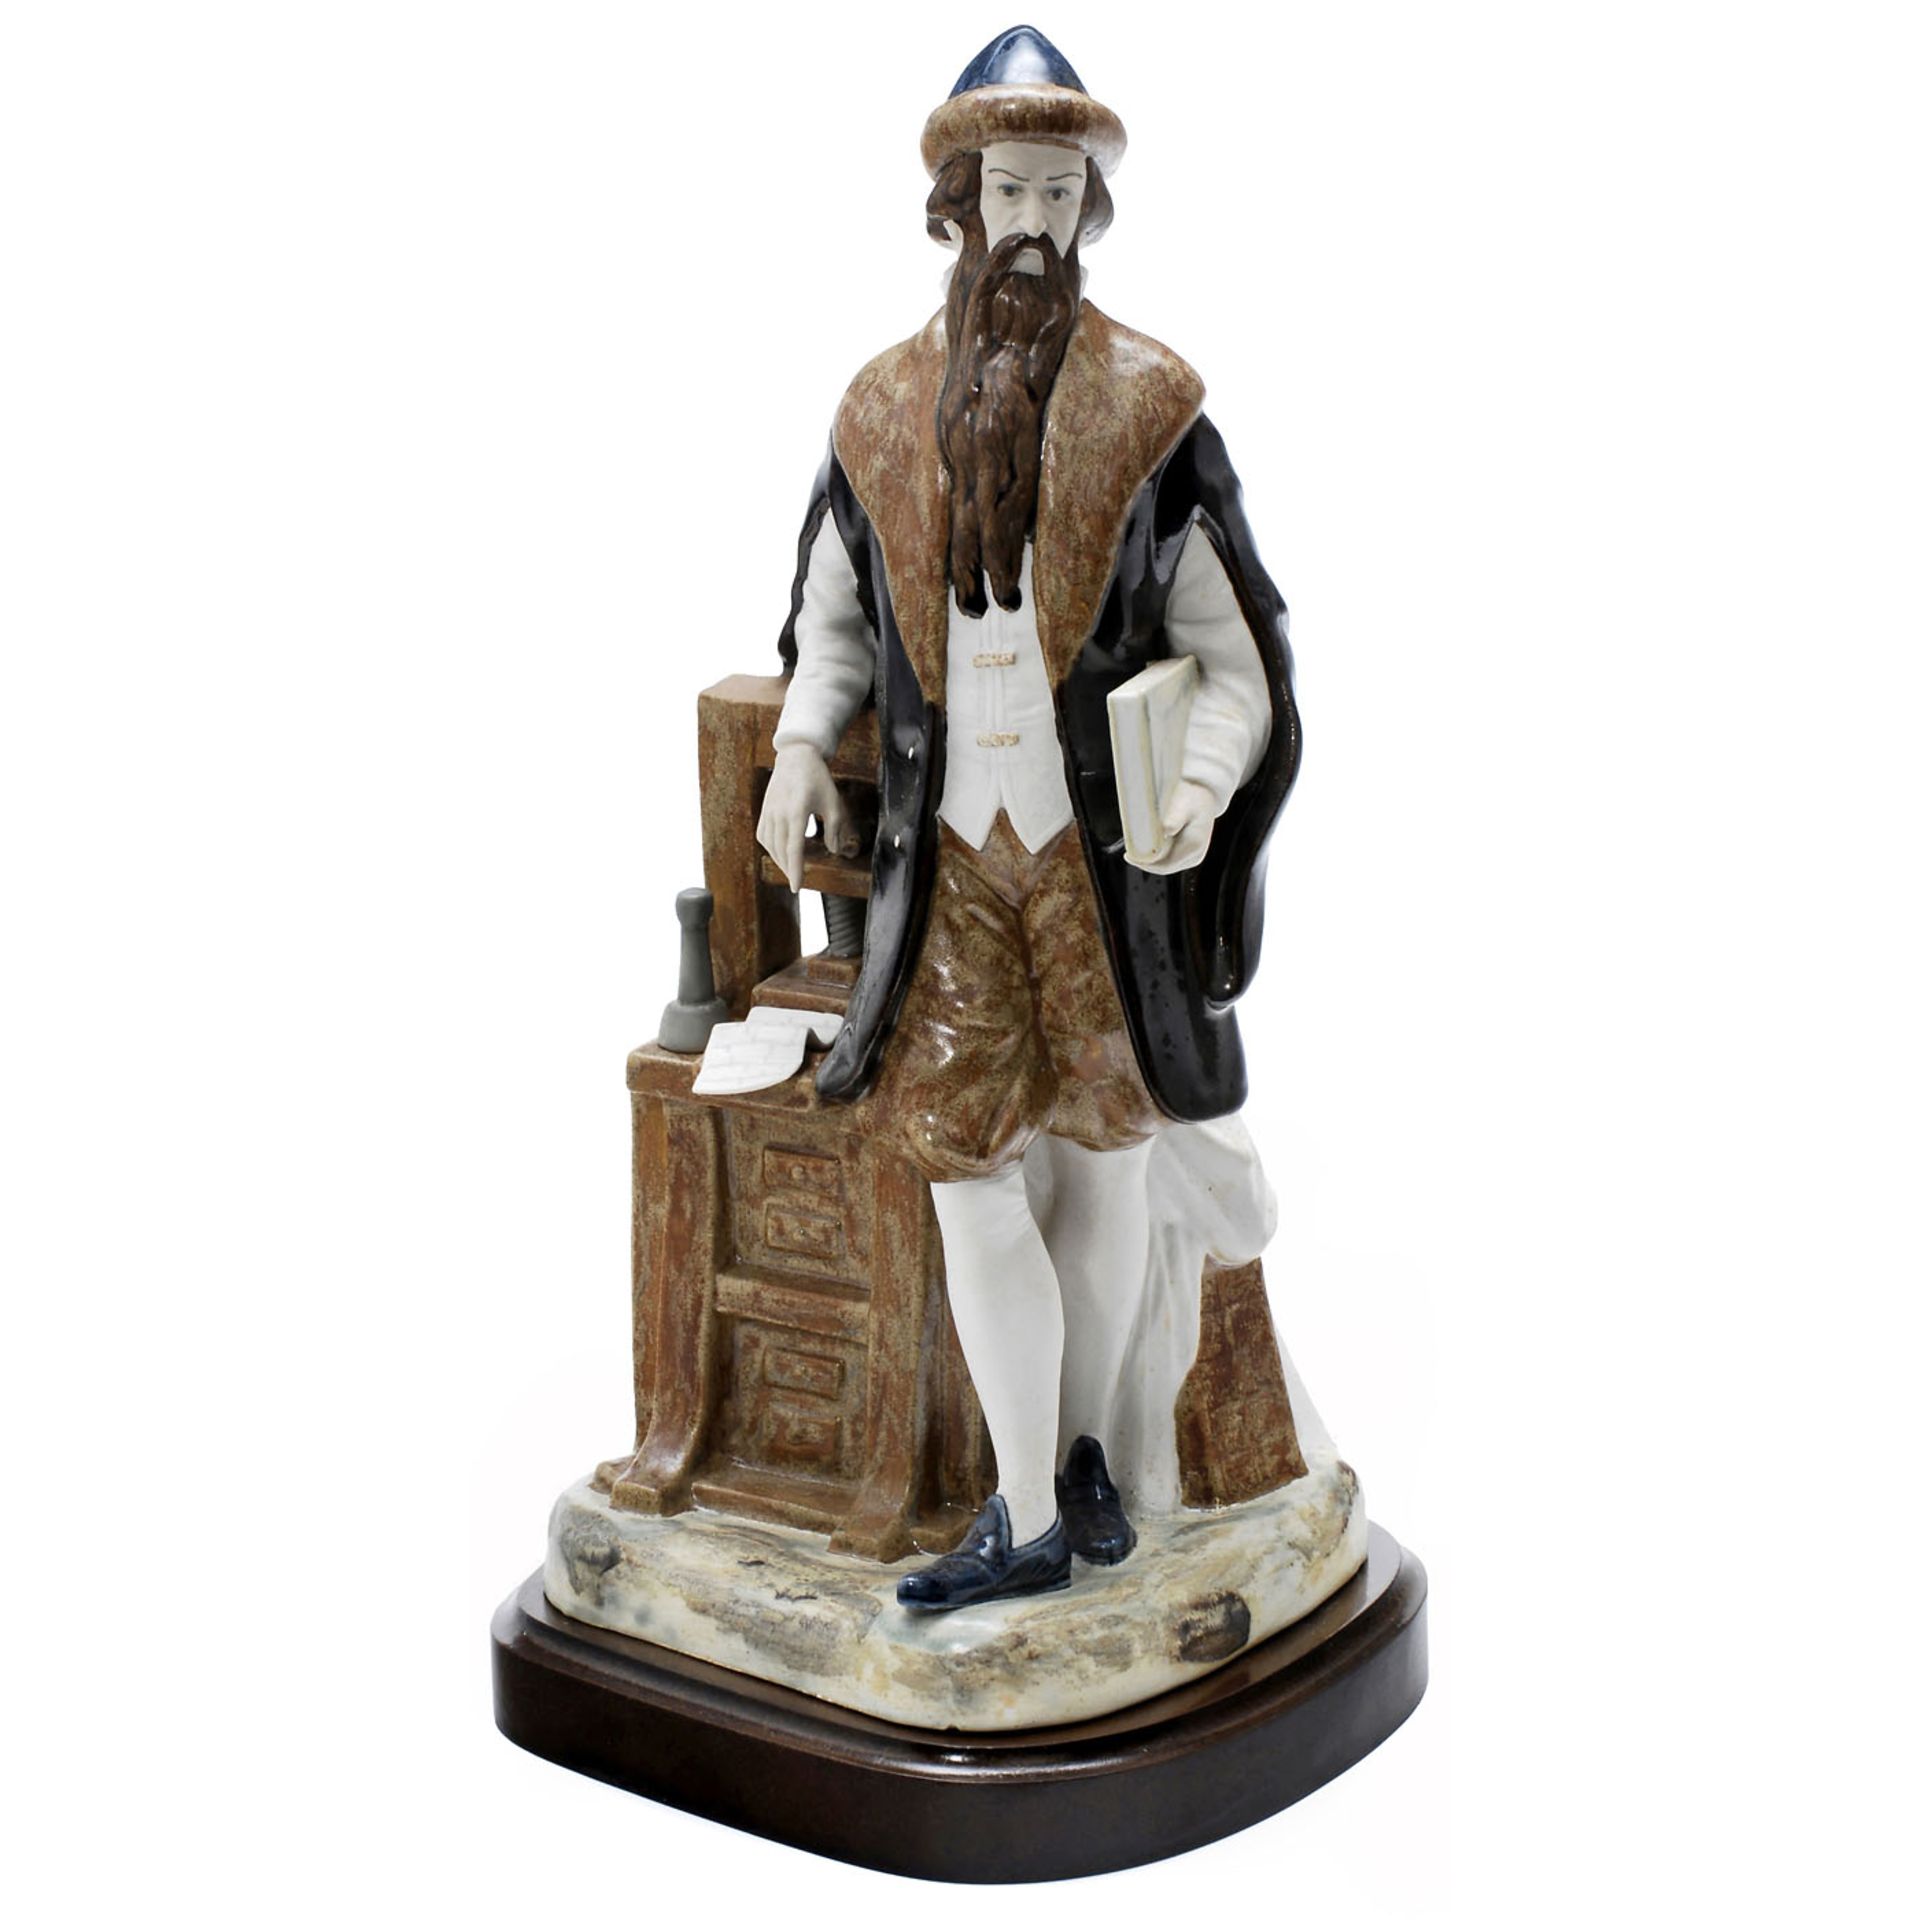 Porcelain Sculpture of the Inventor of Printing Jo-hannes Gutenberg by "Rex Porcelain Manufactur-ing